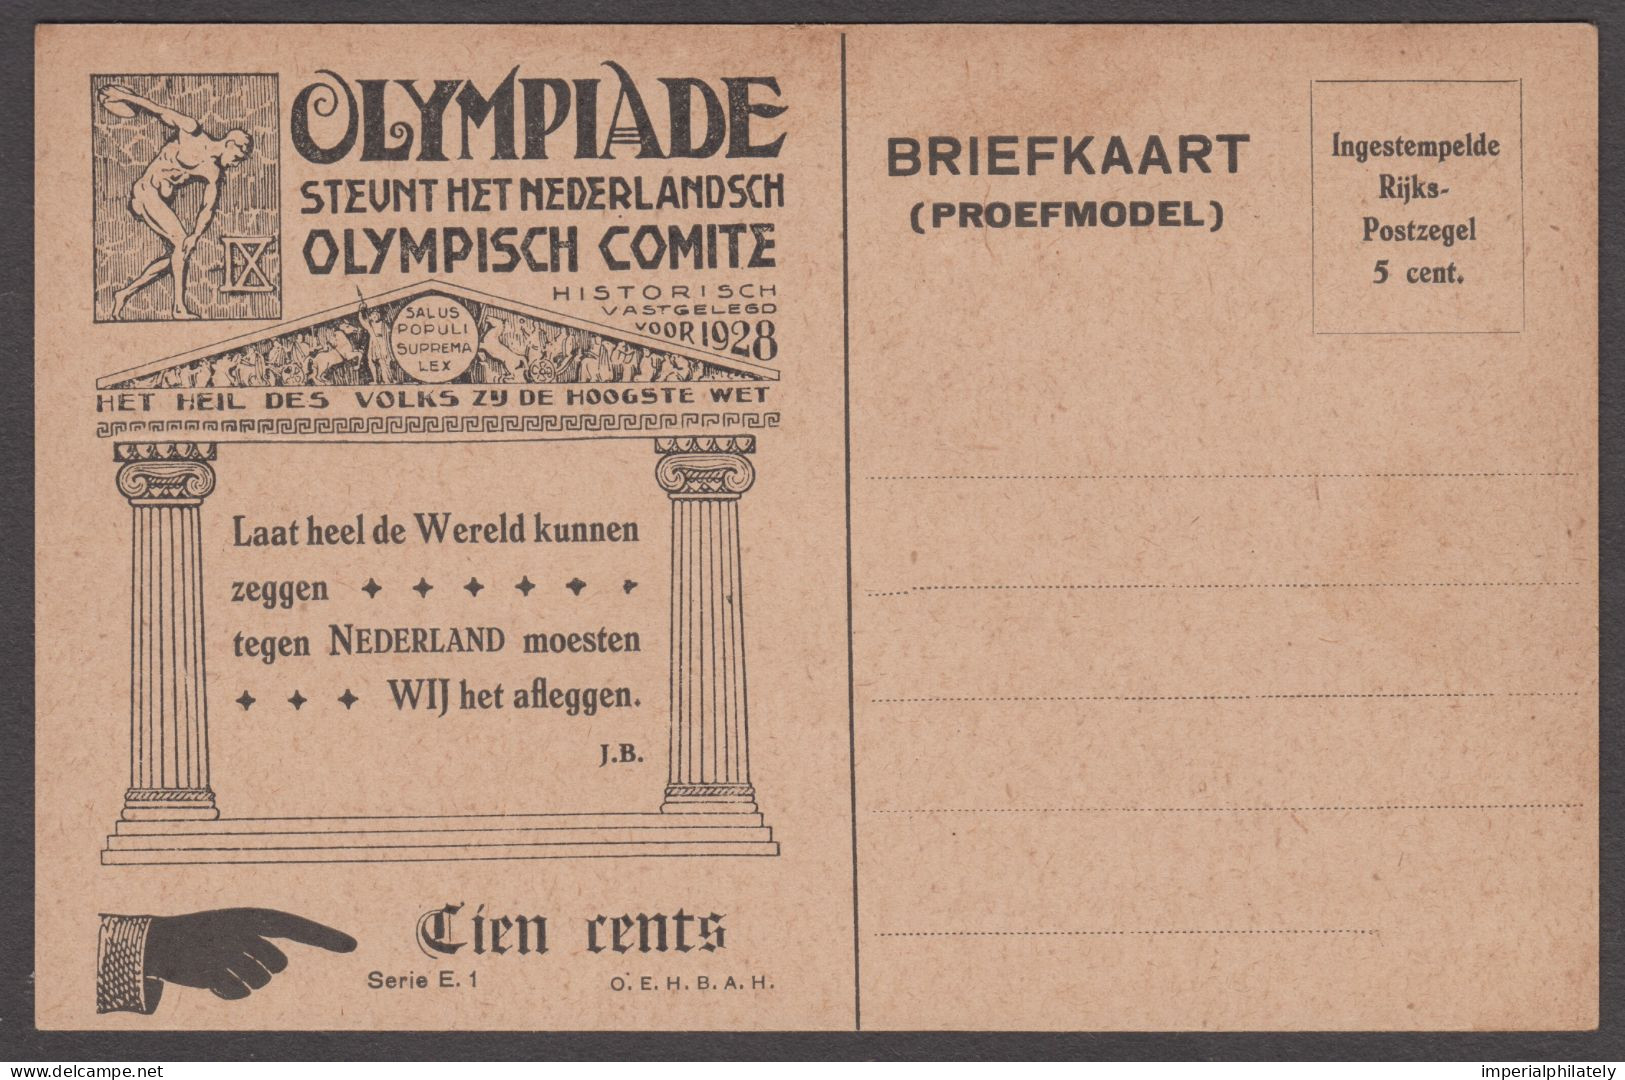 1928 Amsterdam 5c Postal Stationery Card Proof ("proefmodel") By Huygens, Series E.1 - Ete 1928: Amsterdam